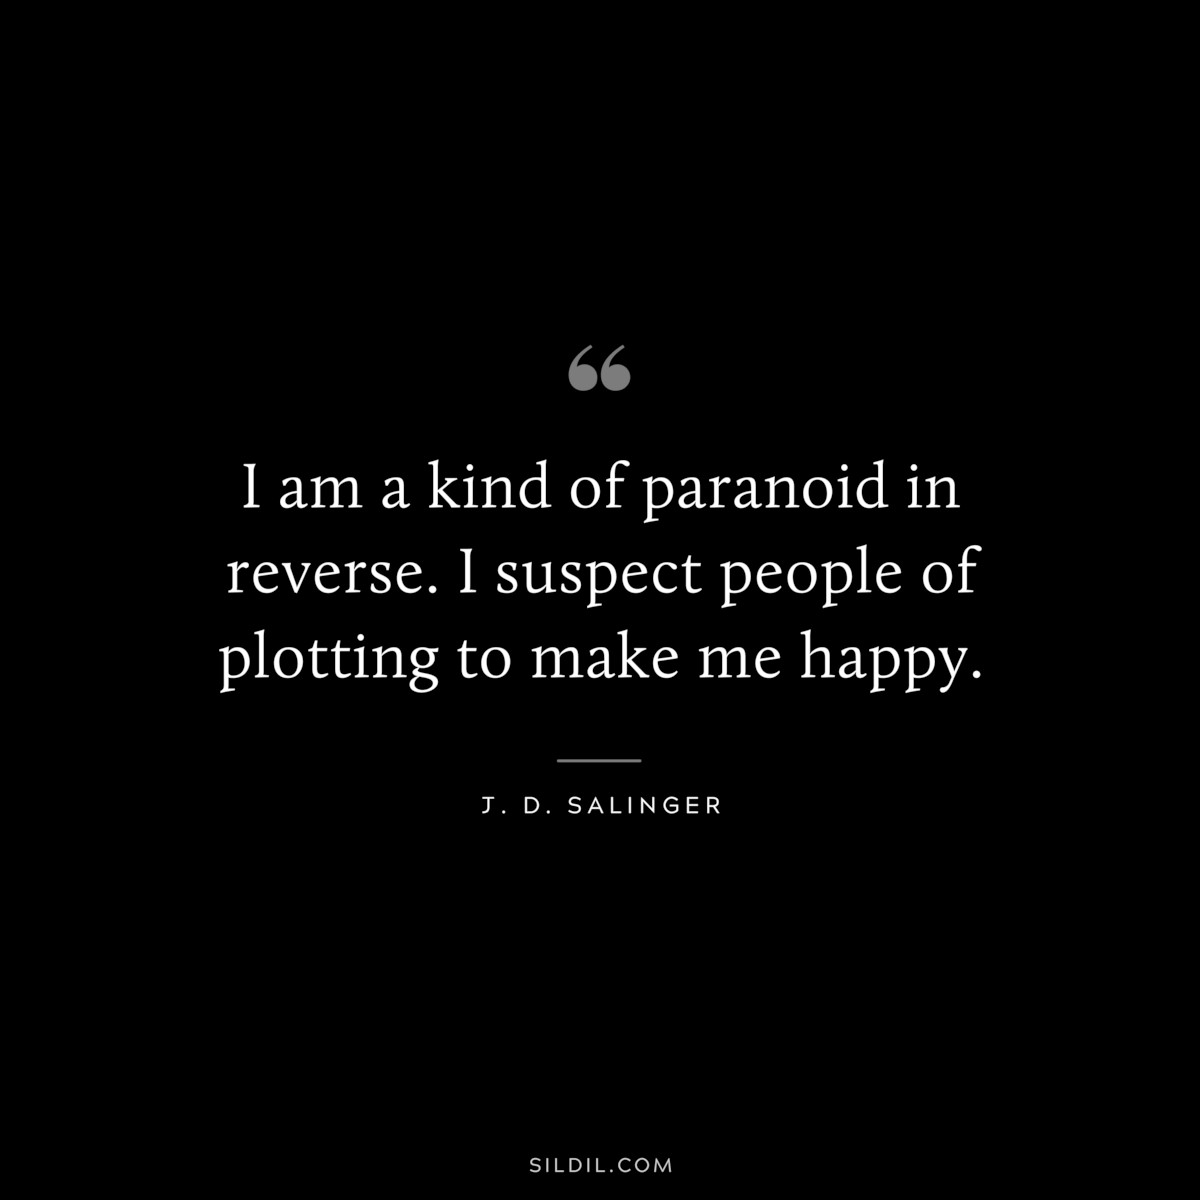 I am a kind of paranoid in reverse. I suspect people of plotting to make me happy. — J. D. Salinger